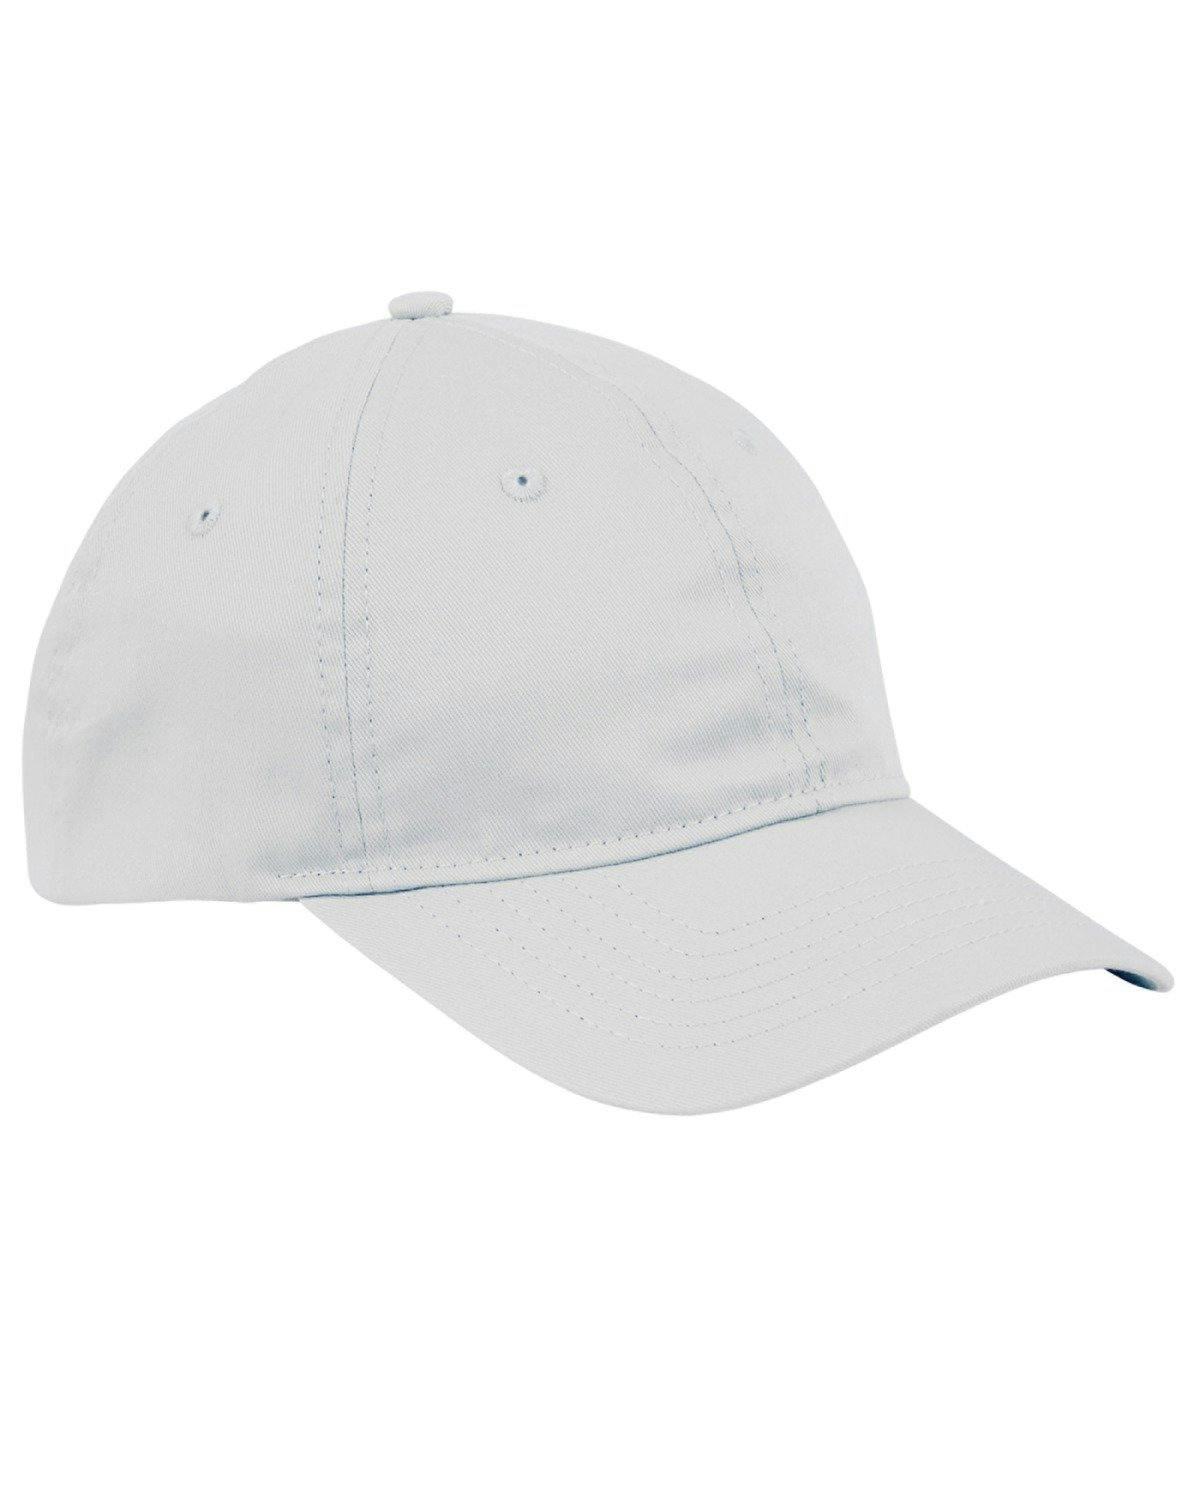 Image for Twill Unstructured Cap